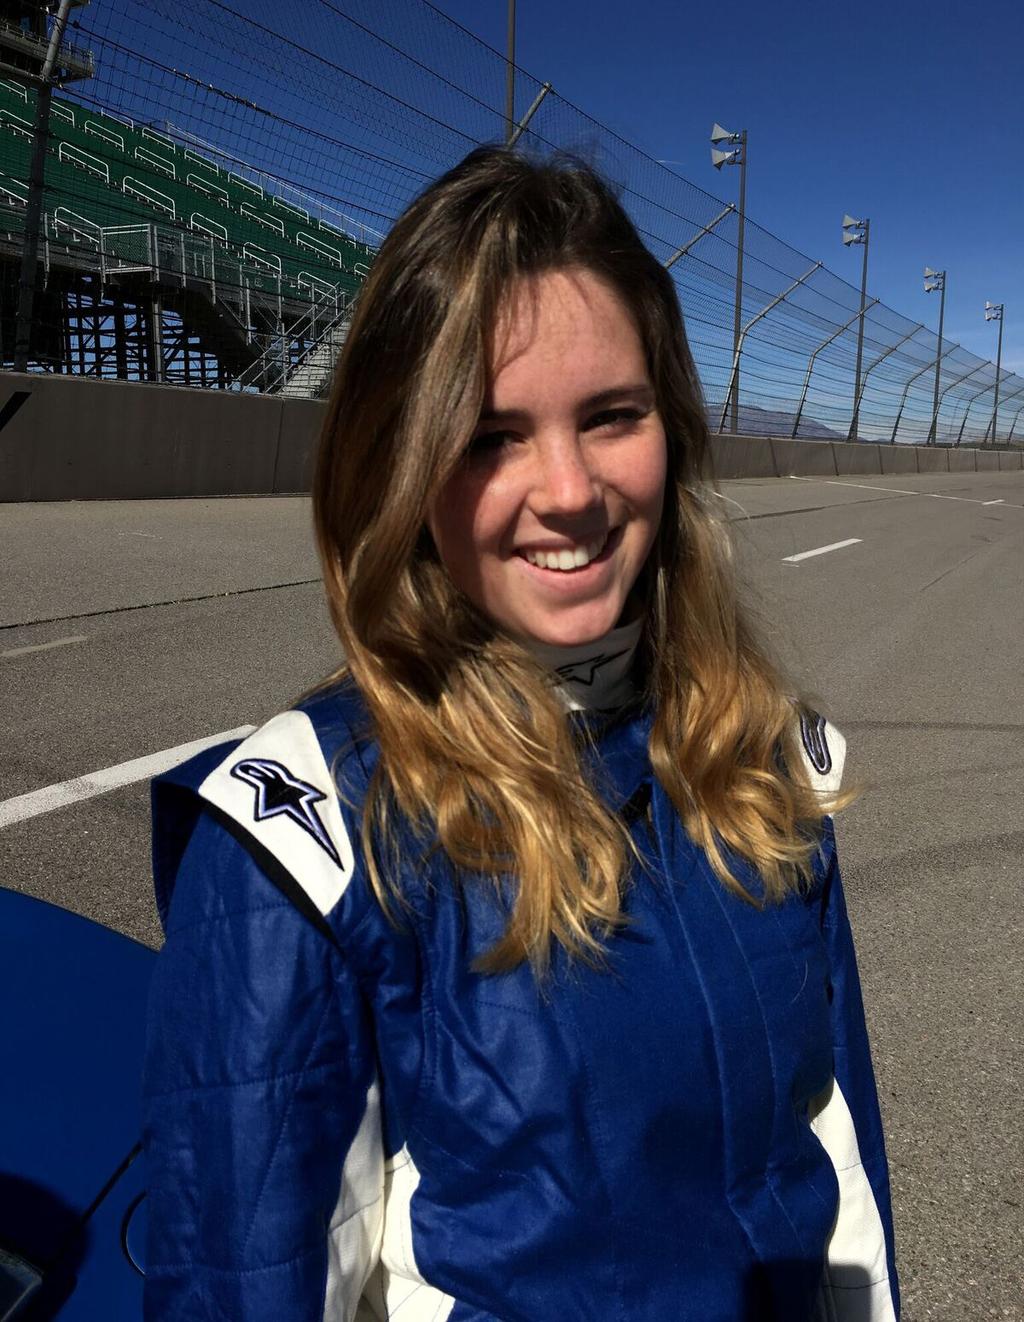 LONI UNSER S EARLY RACING CAREER Excellence from Loni abounds in all aspects of her life. This high school National Honor Society member has shined academically and in a variety of competitive sports.